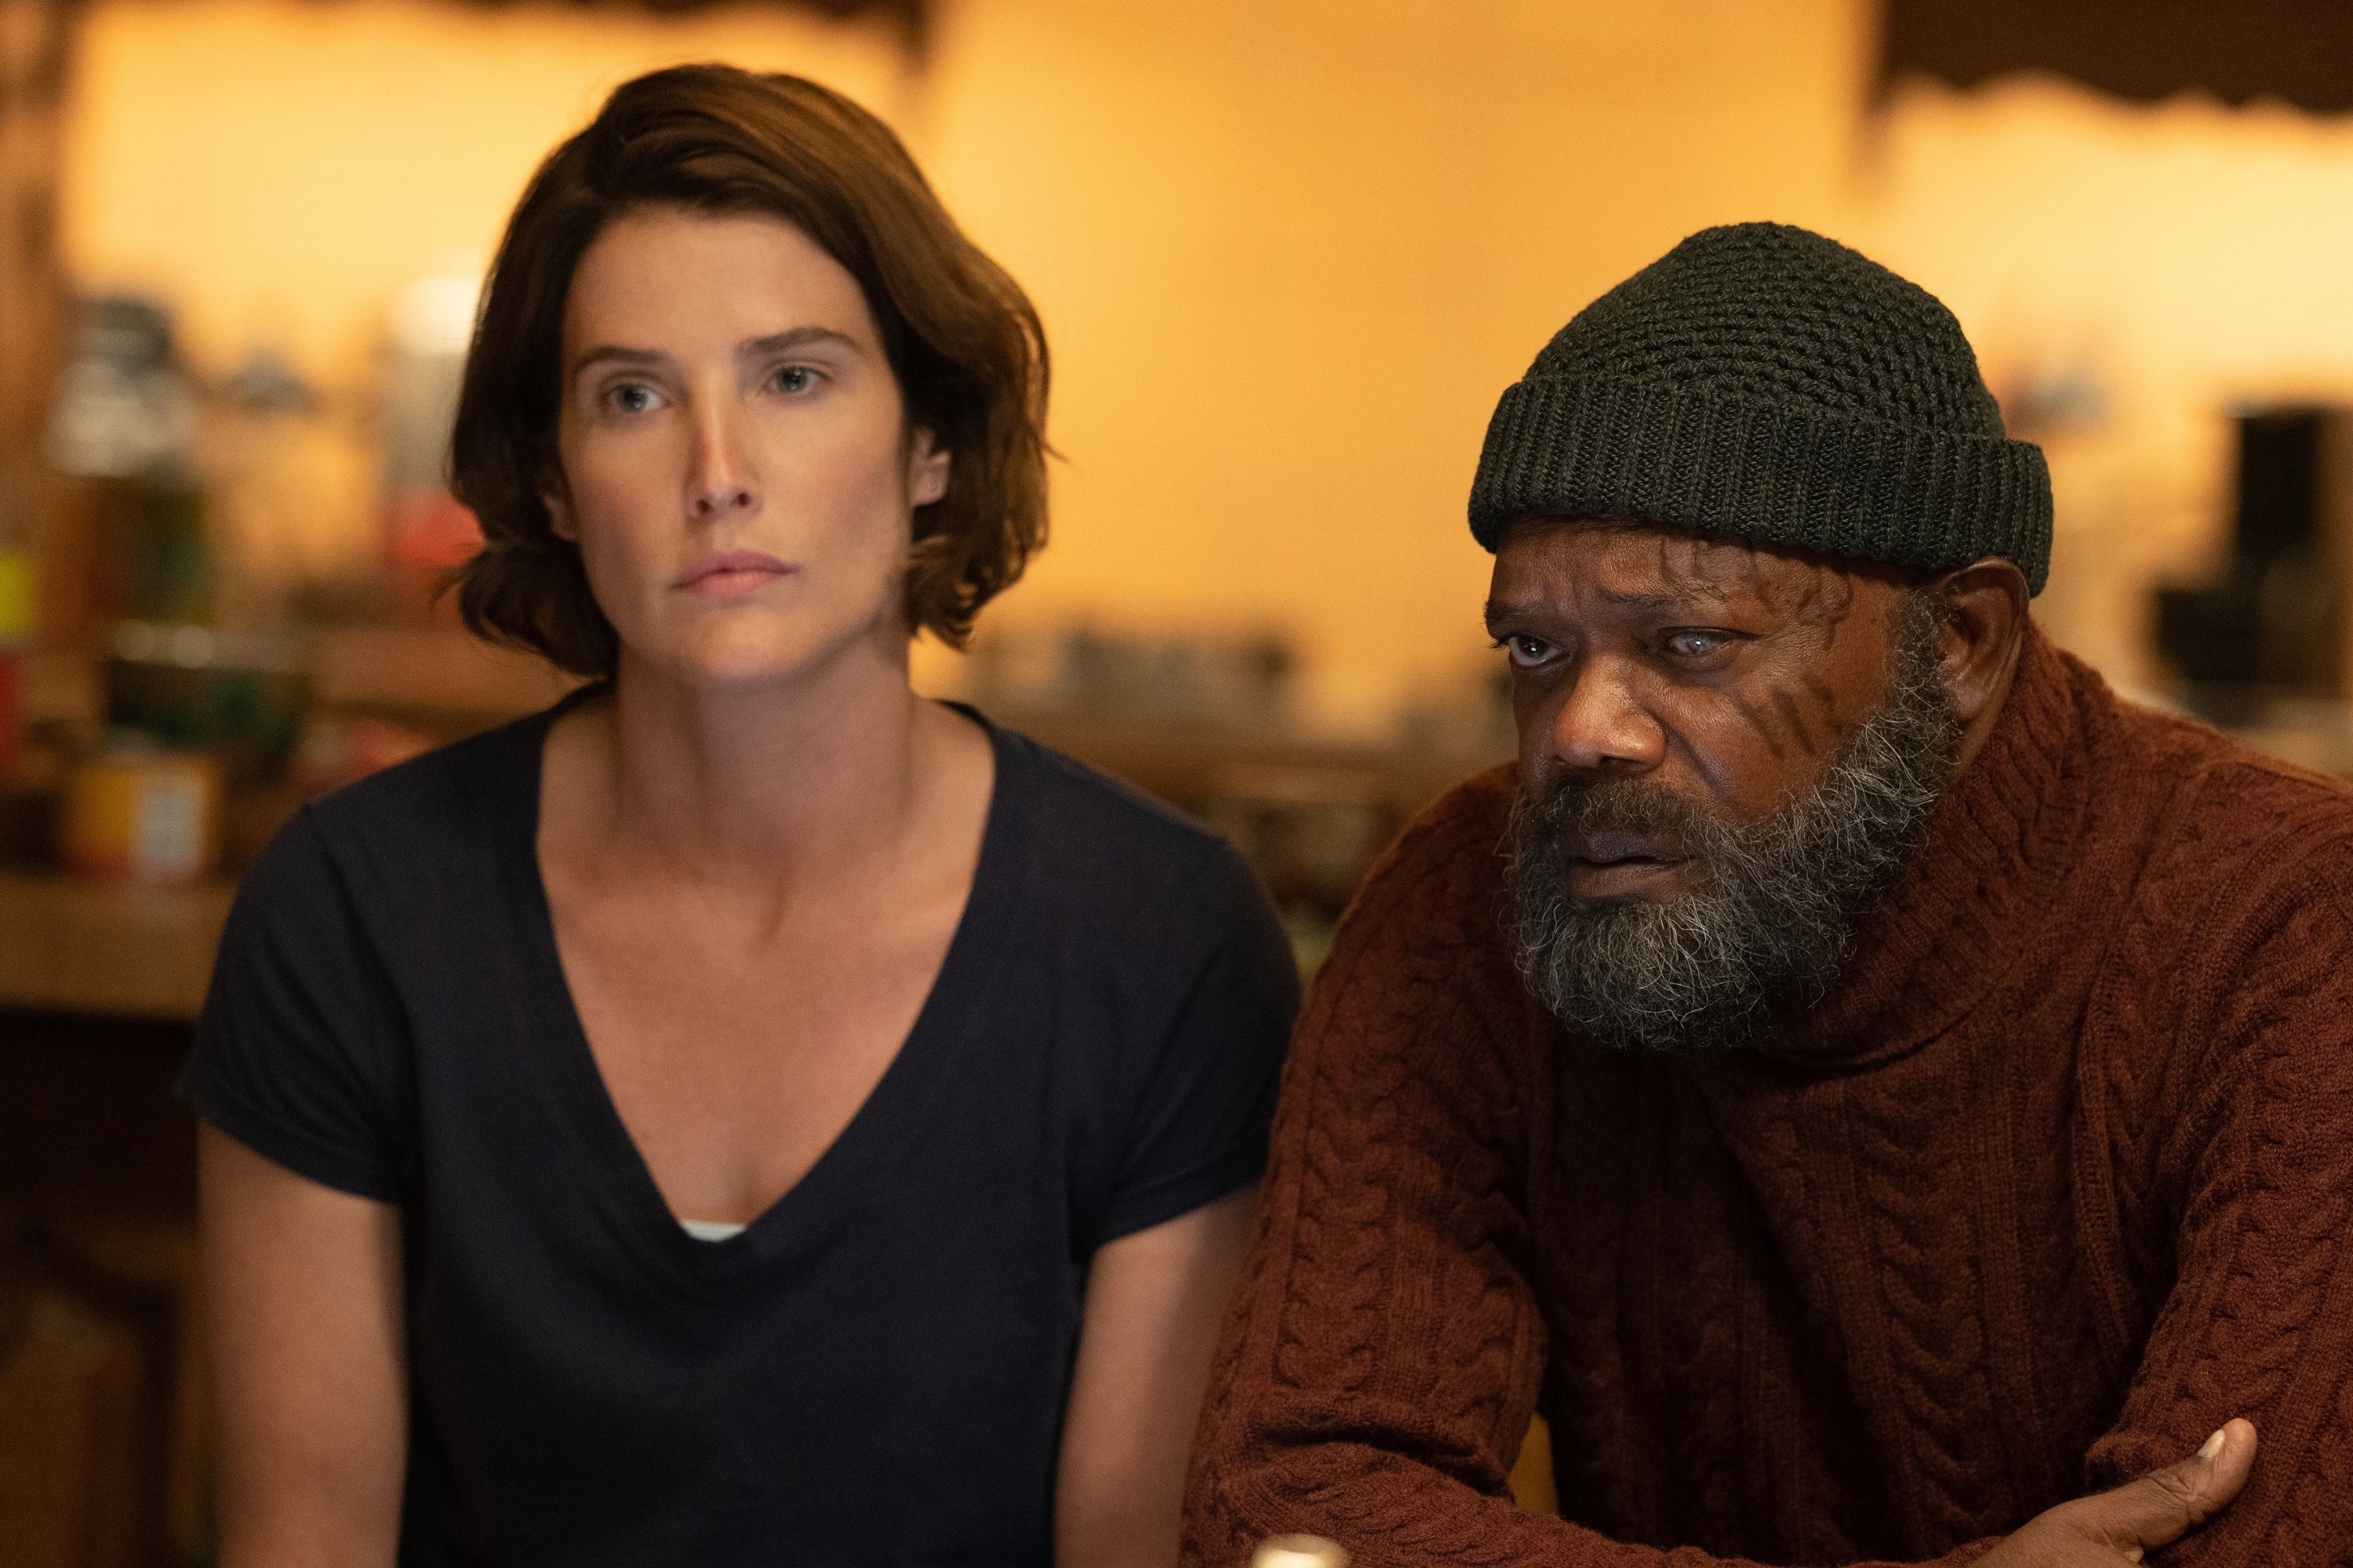 Maria Hill and Nick Fury sitting together, looking sad